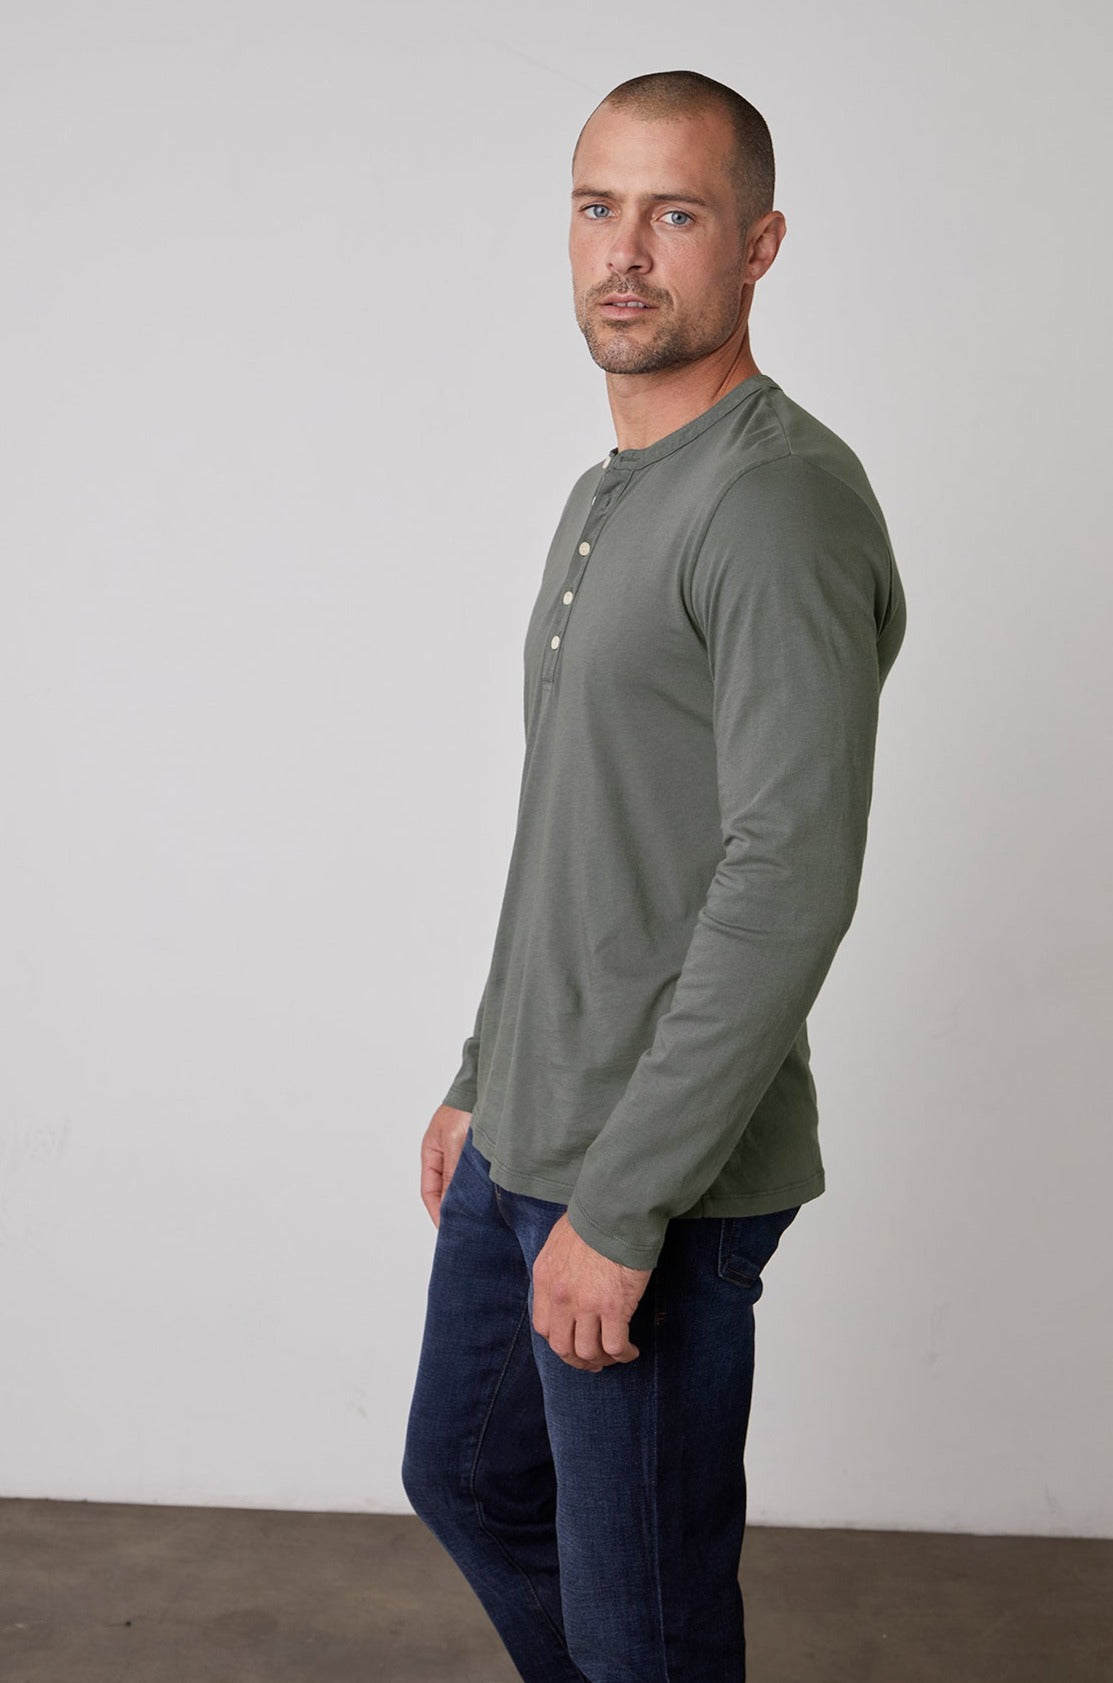 A person with short hair wearing a green long-sleeve lightweight ALVARO HENLEY by Velvet by Graham & Spencer and dark jeans stands against a plain white background.-23778972532929